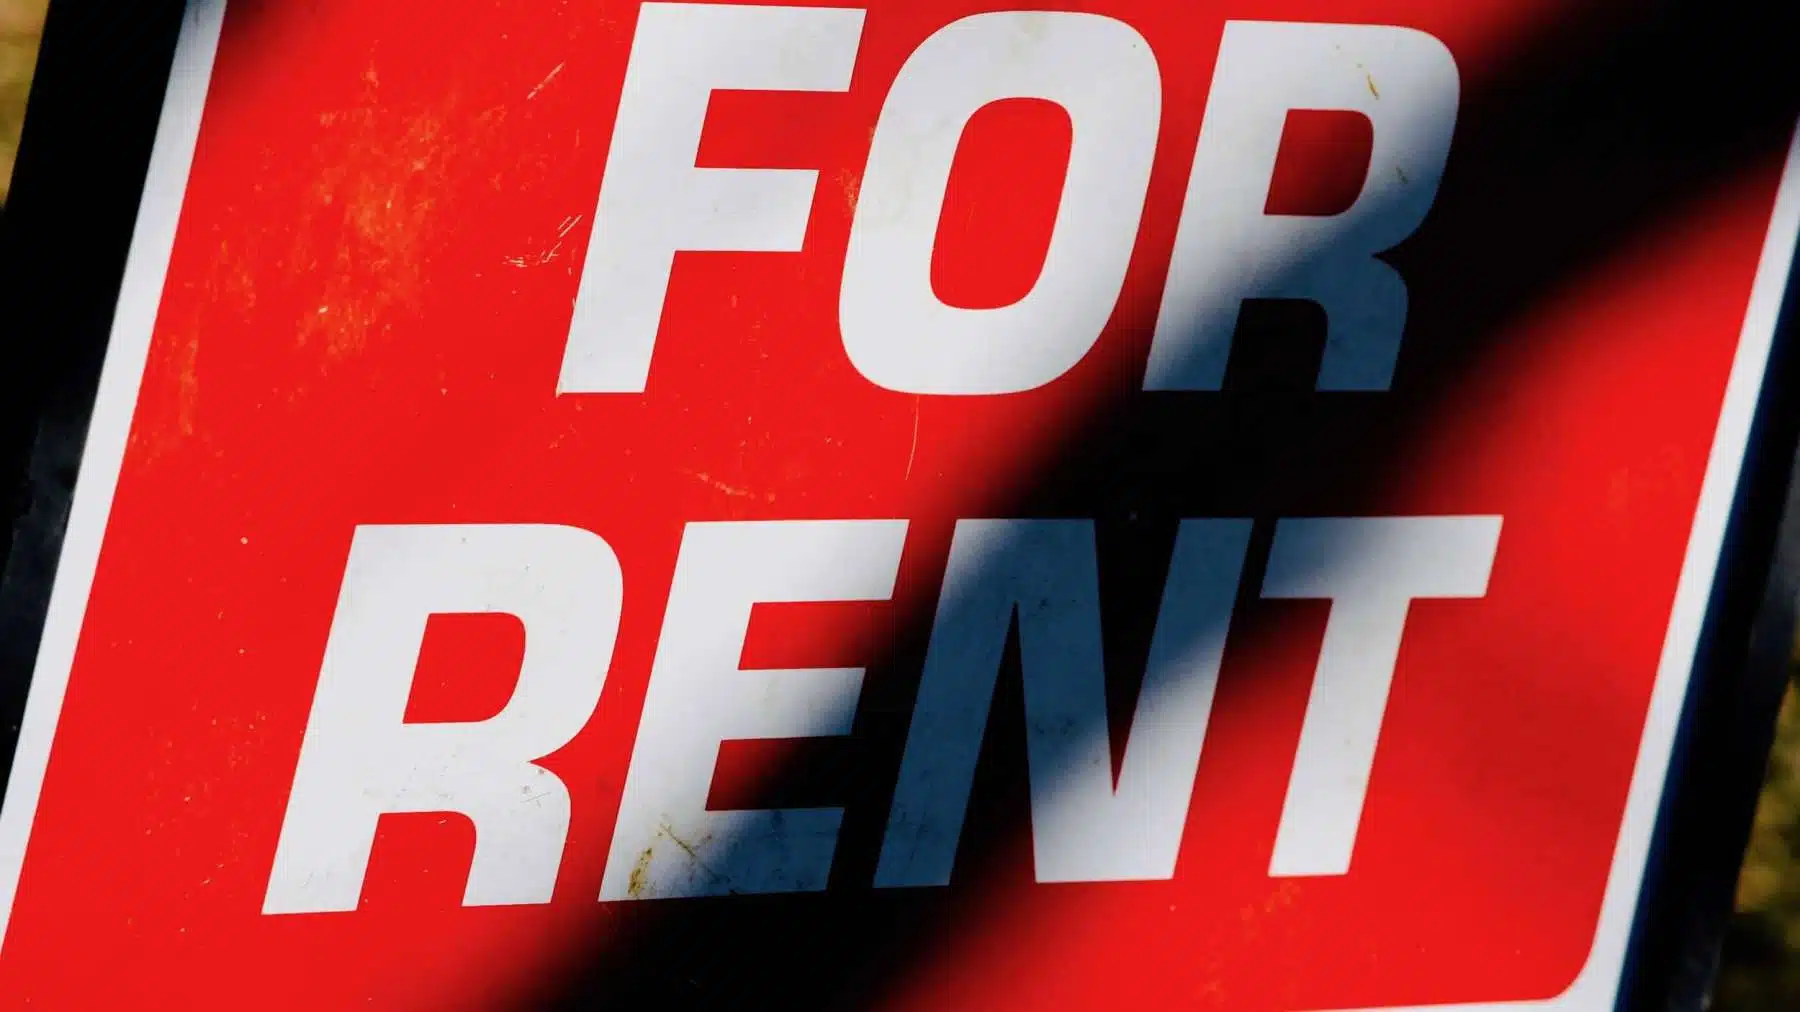 Rhode Island’s slow and nonexistent action on rental and housing assistance is cruel